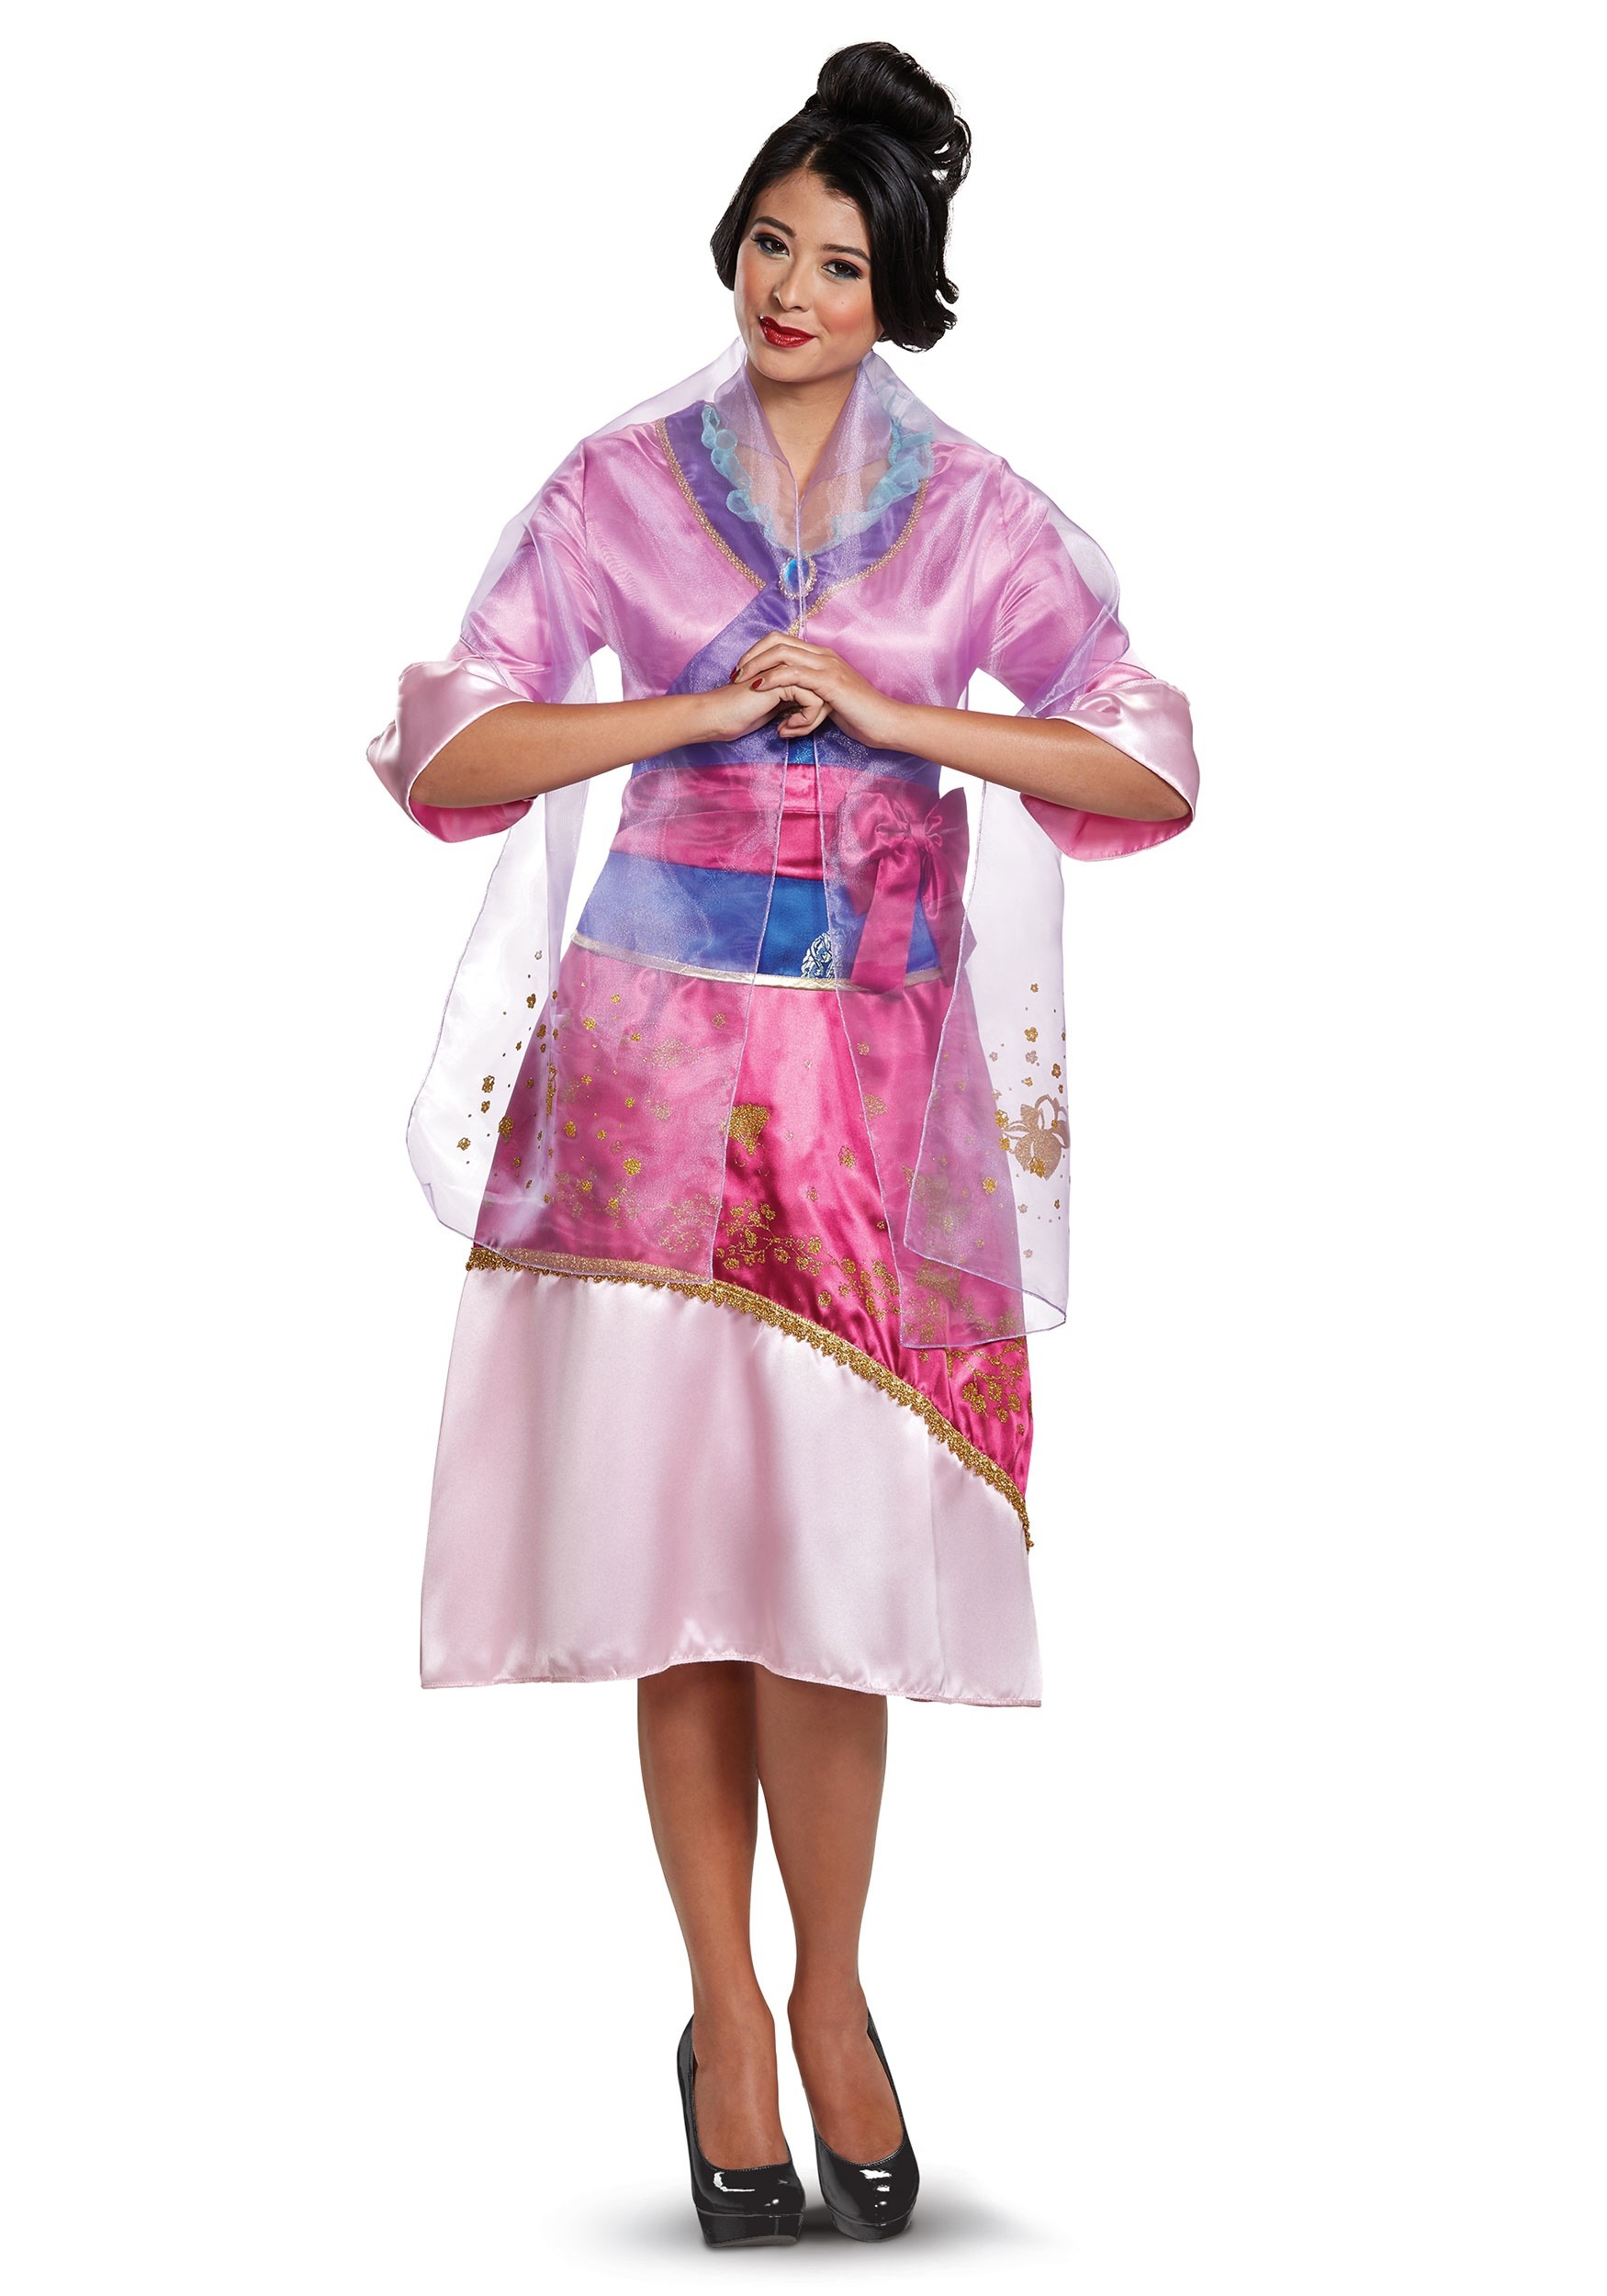 Mulan Deluxe Costume for Adult